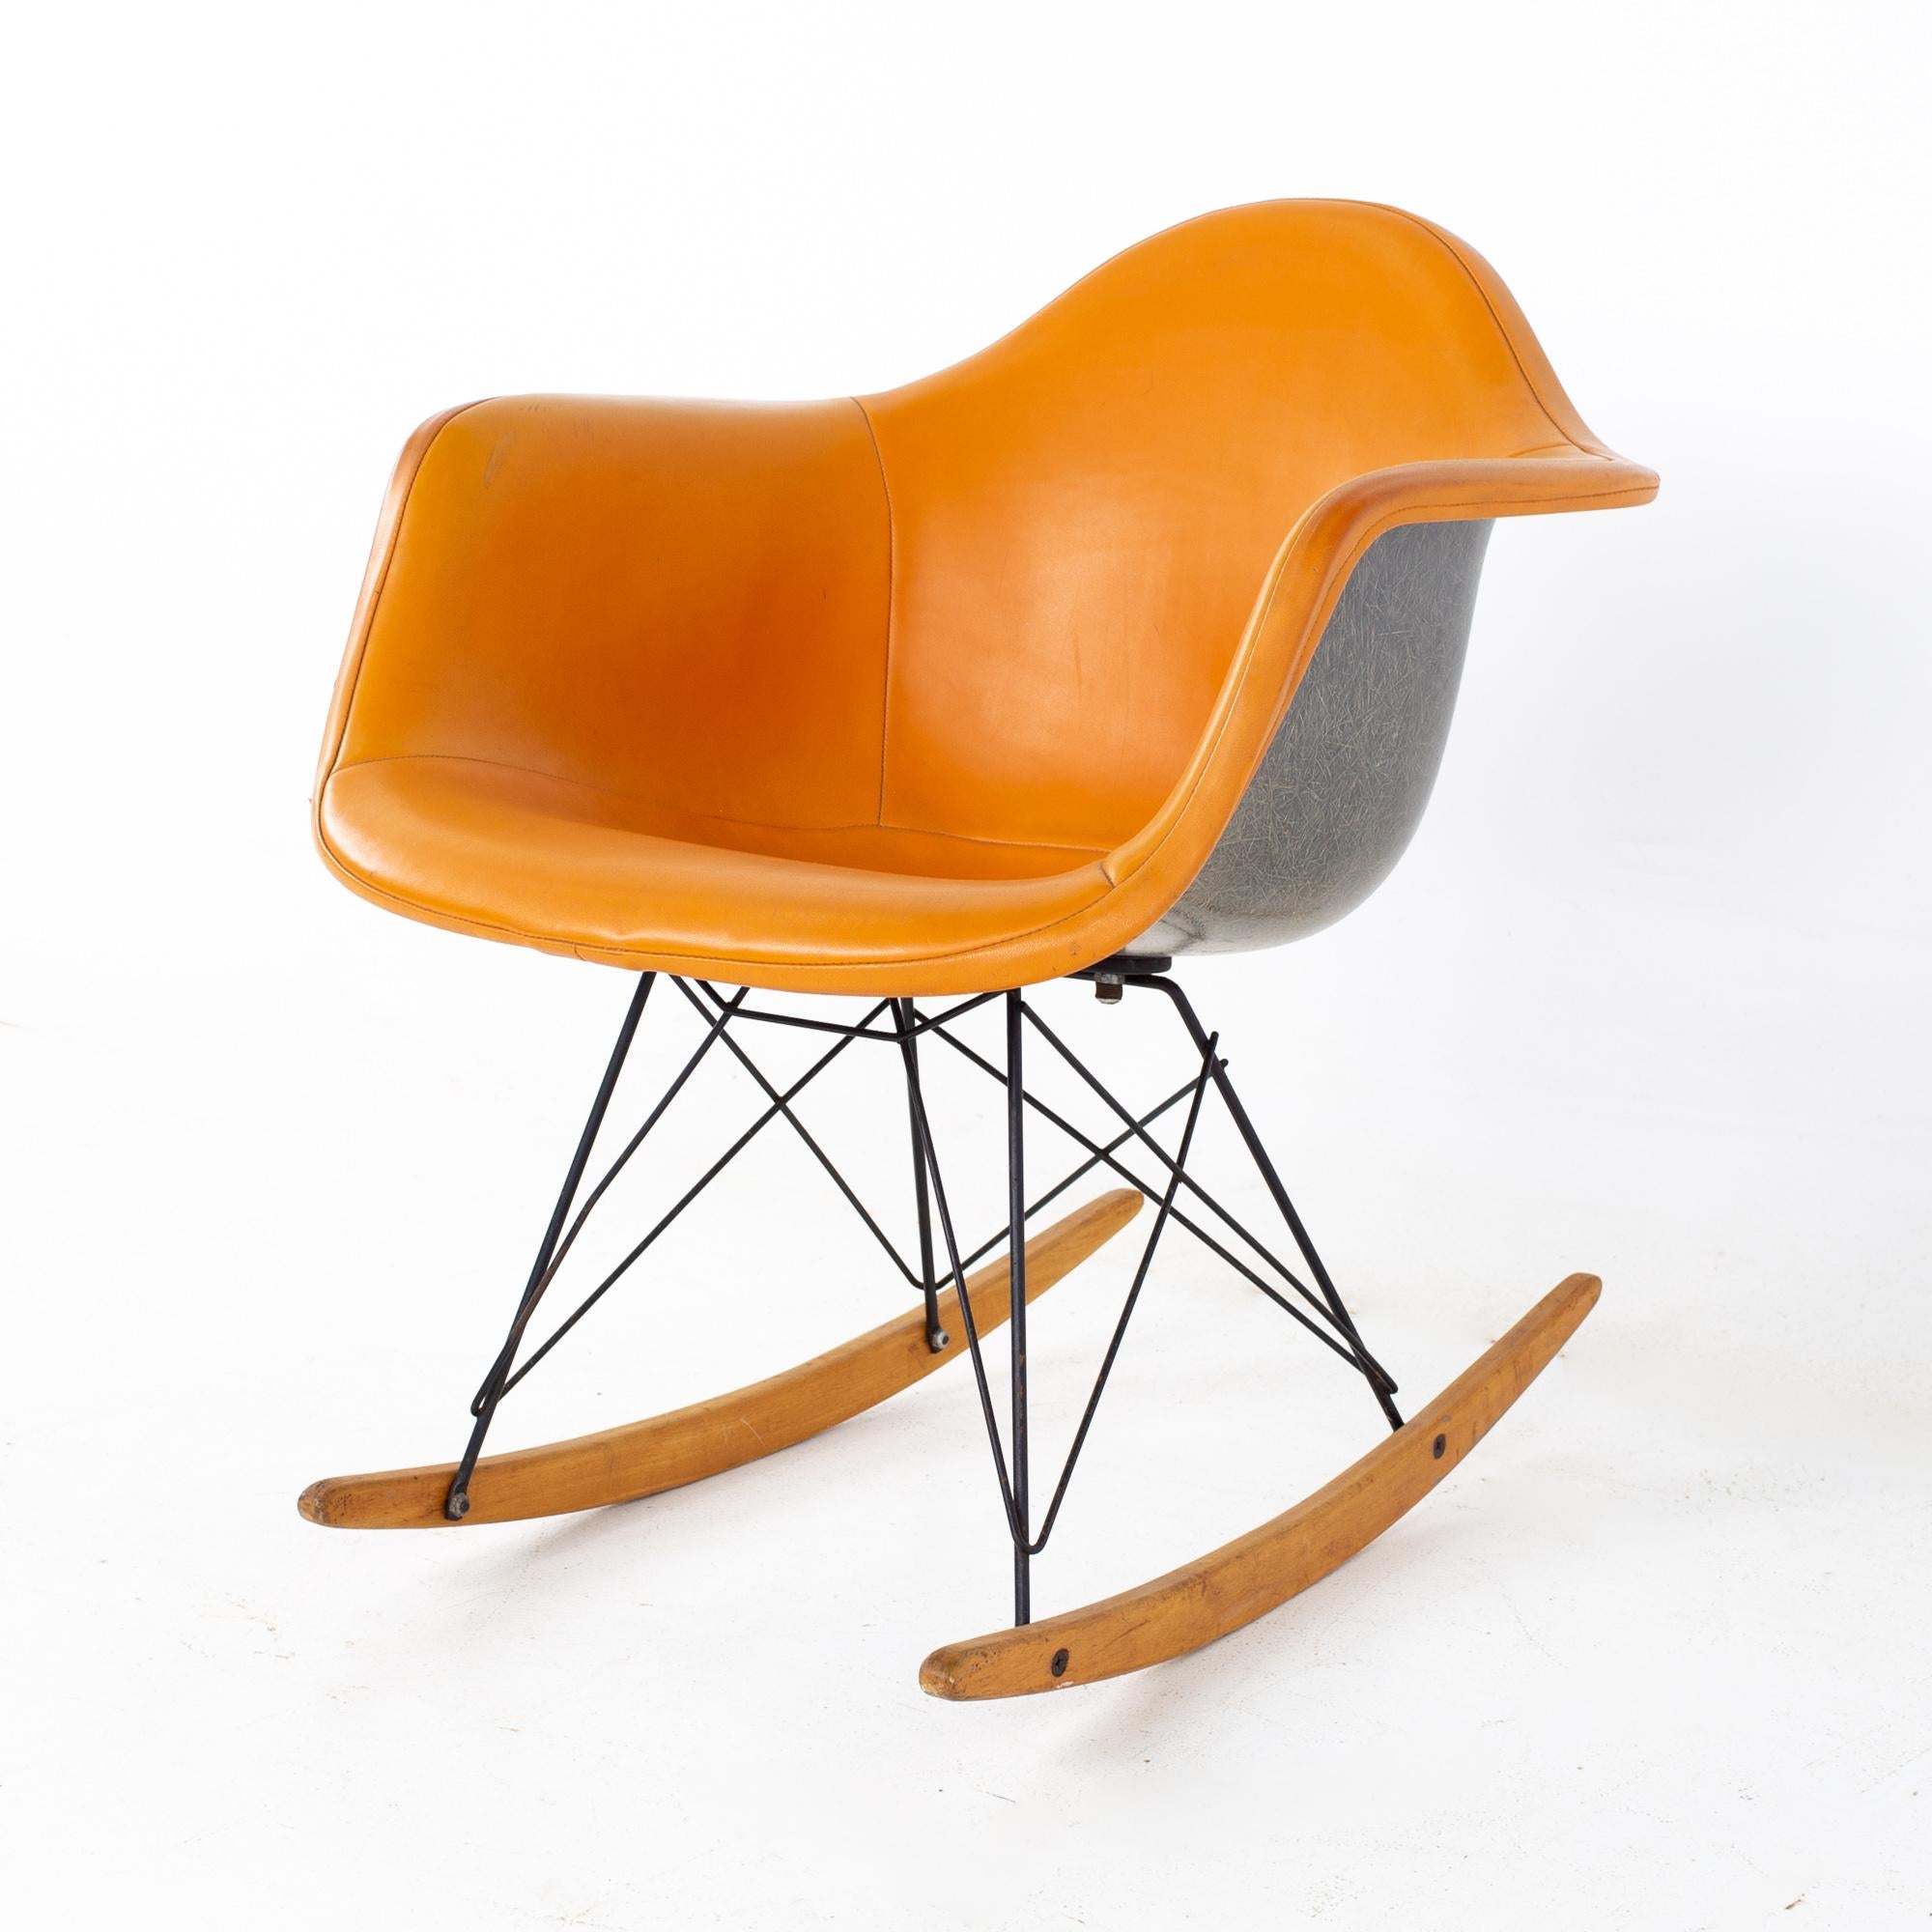 Charles Eames for Herman Miller Mid Century Orange Fiberglass Shell Rocking Chair 
Chair measures: 25 wide x 25 deep x 27.5 high, with a seat height of 16 inches and arm height of 23.5 inches

 All pieces of furniture can be had in what we call